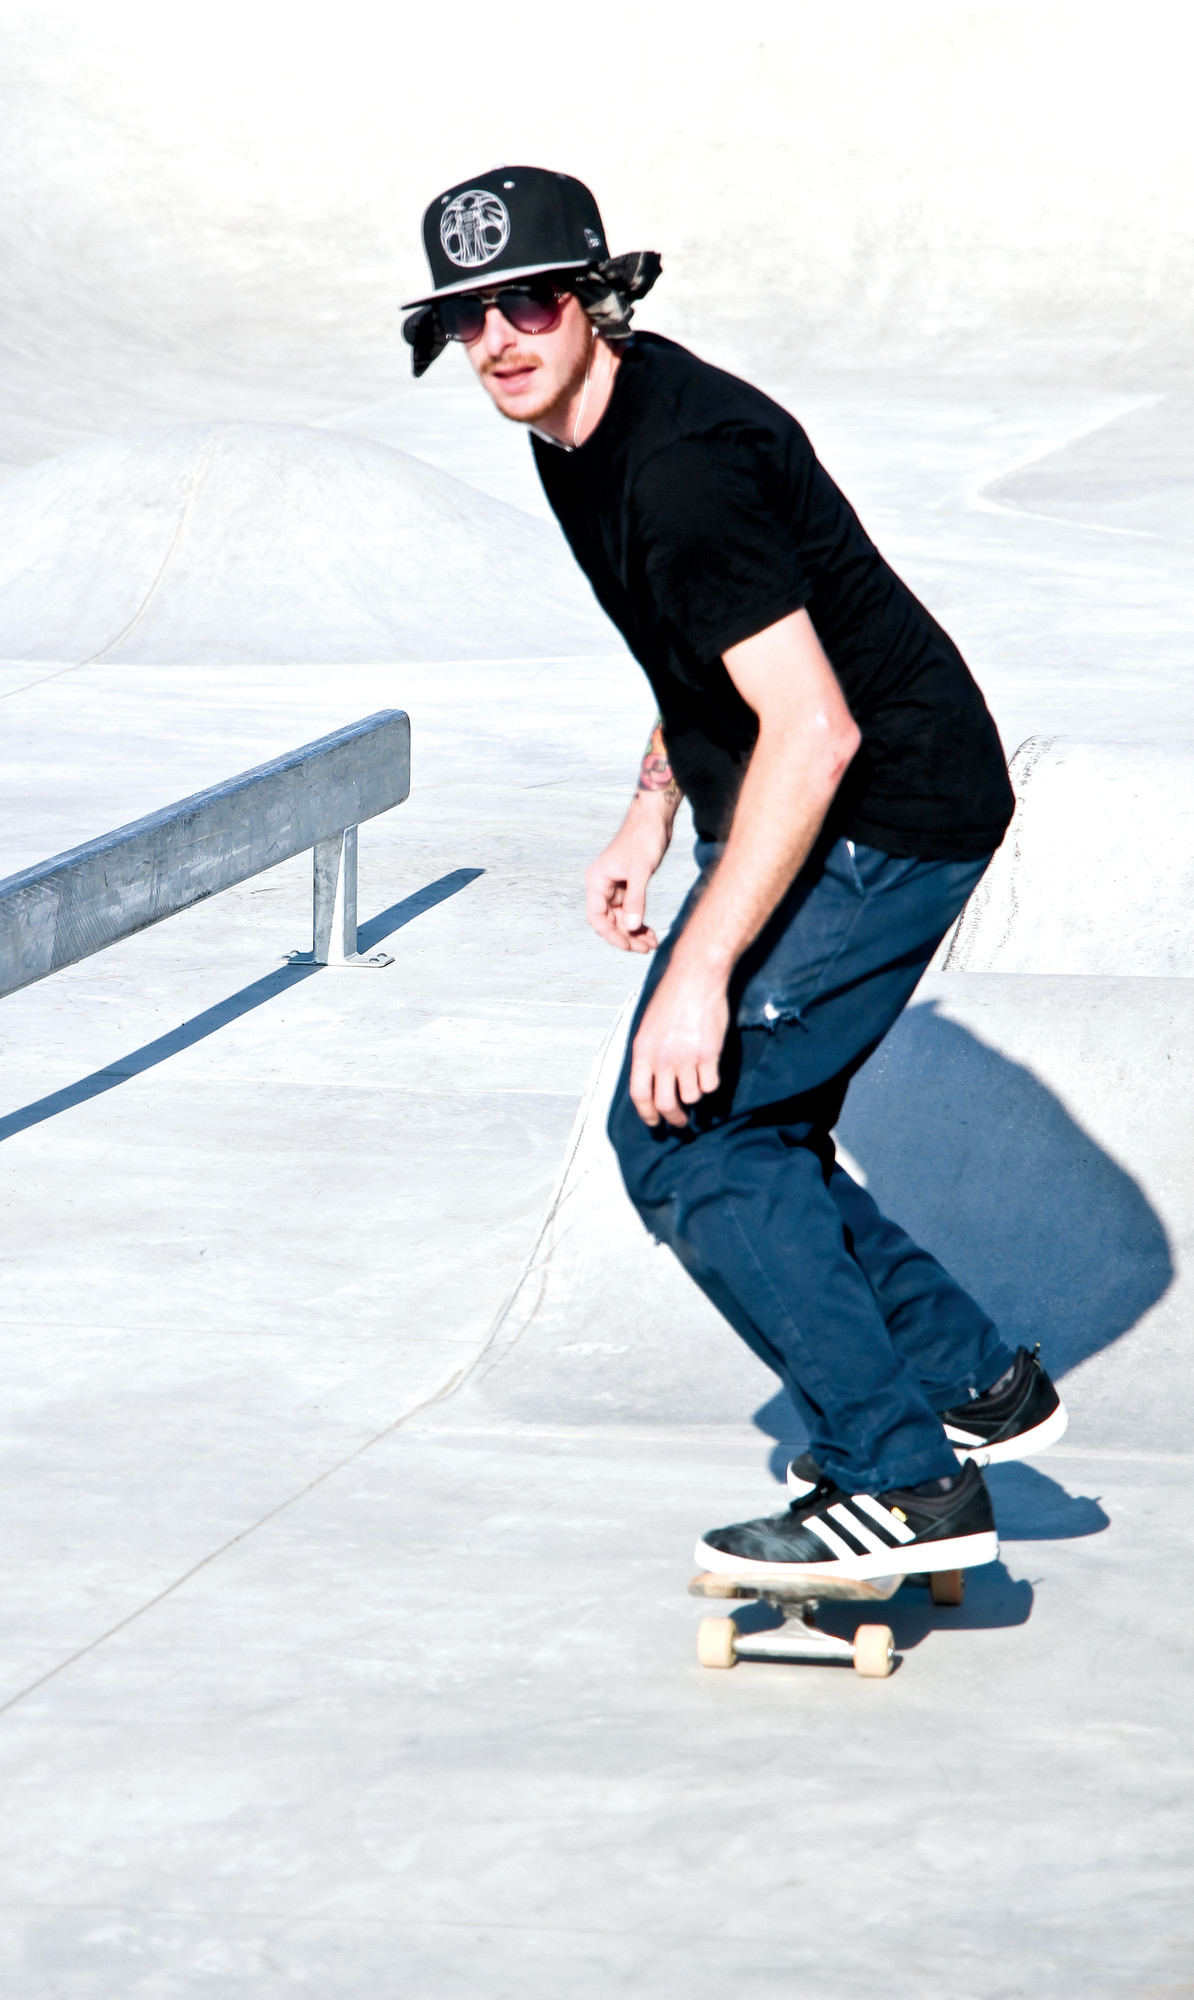 Shane McGrane skated along the new park, riding its ramps and bowls.